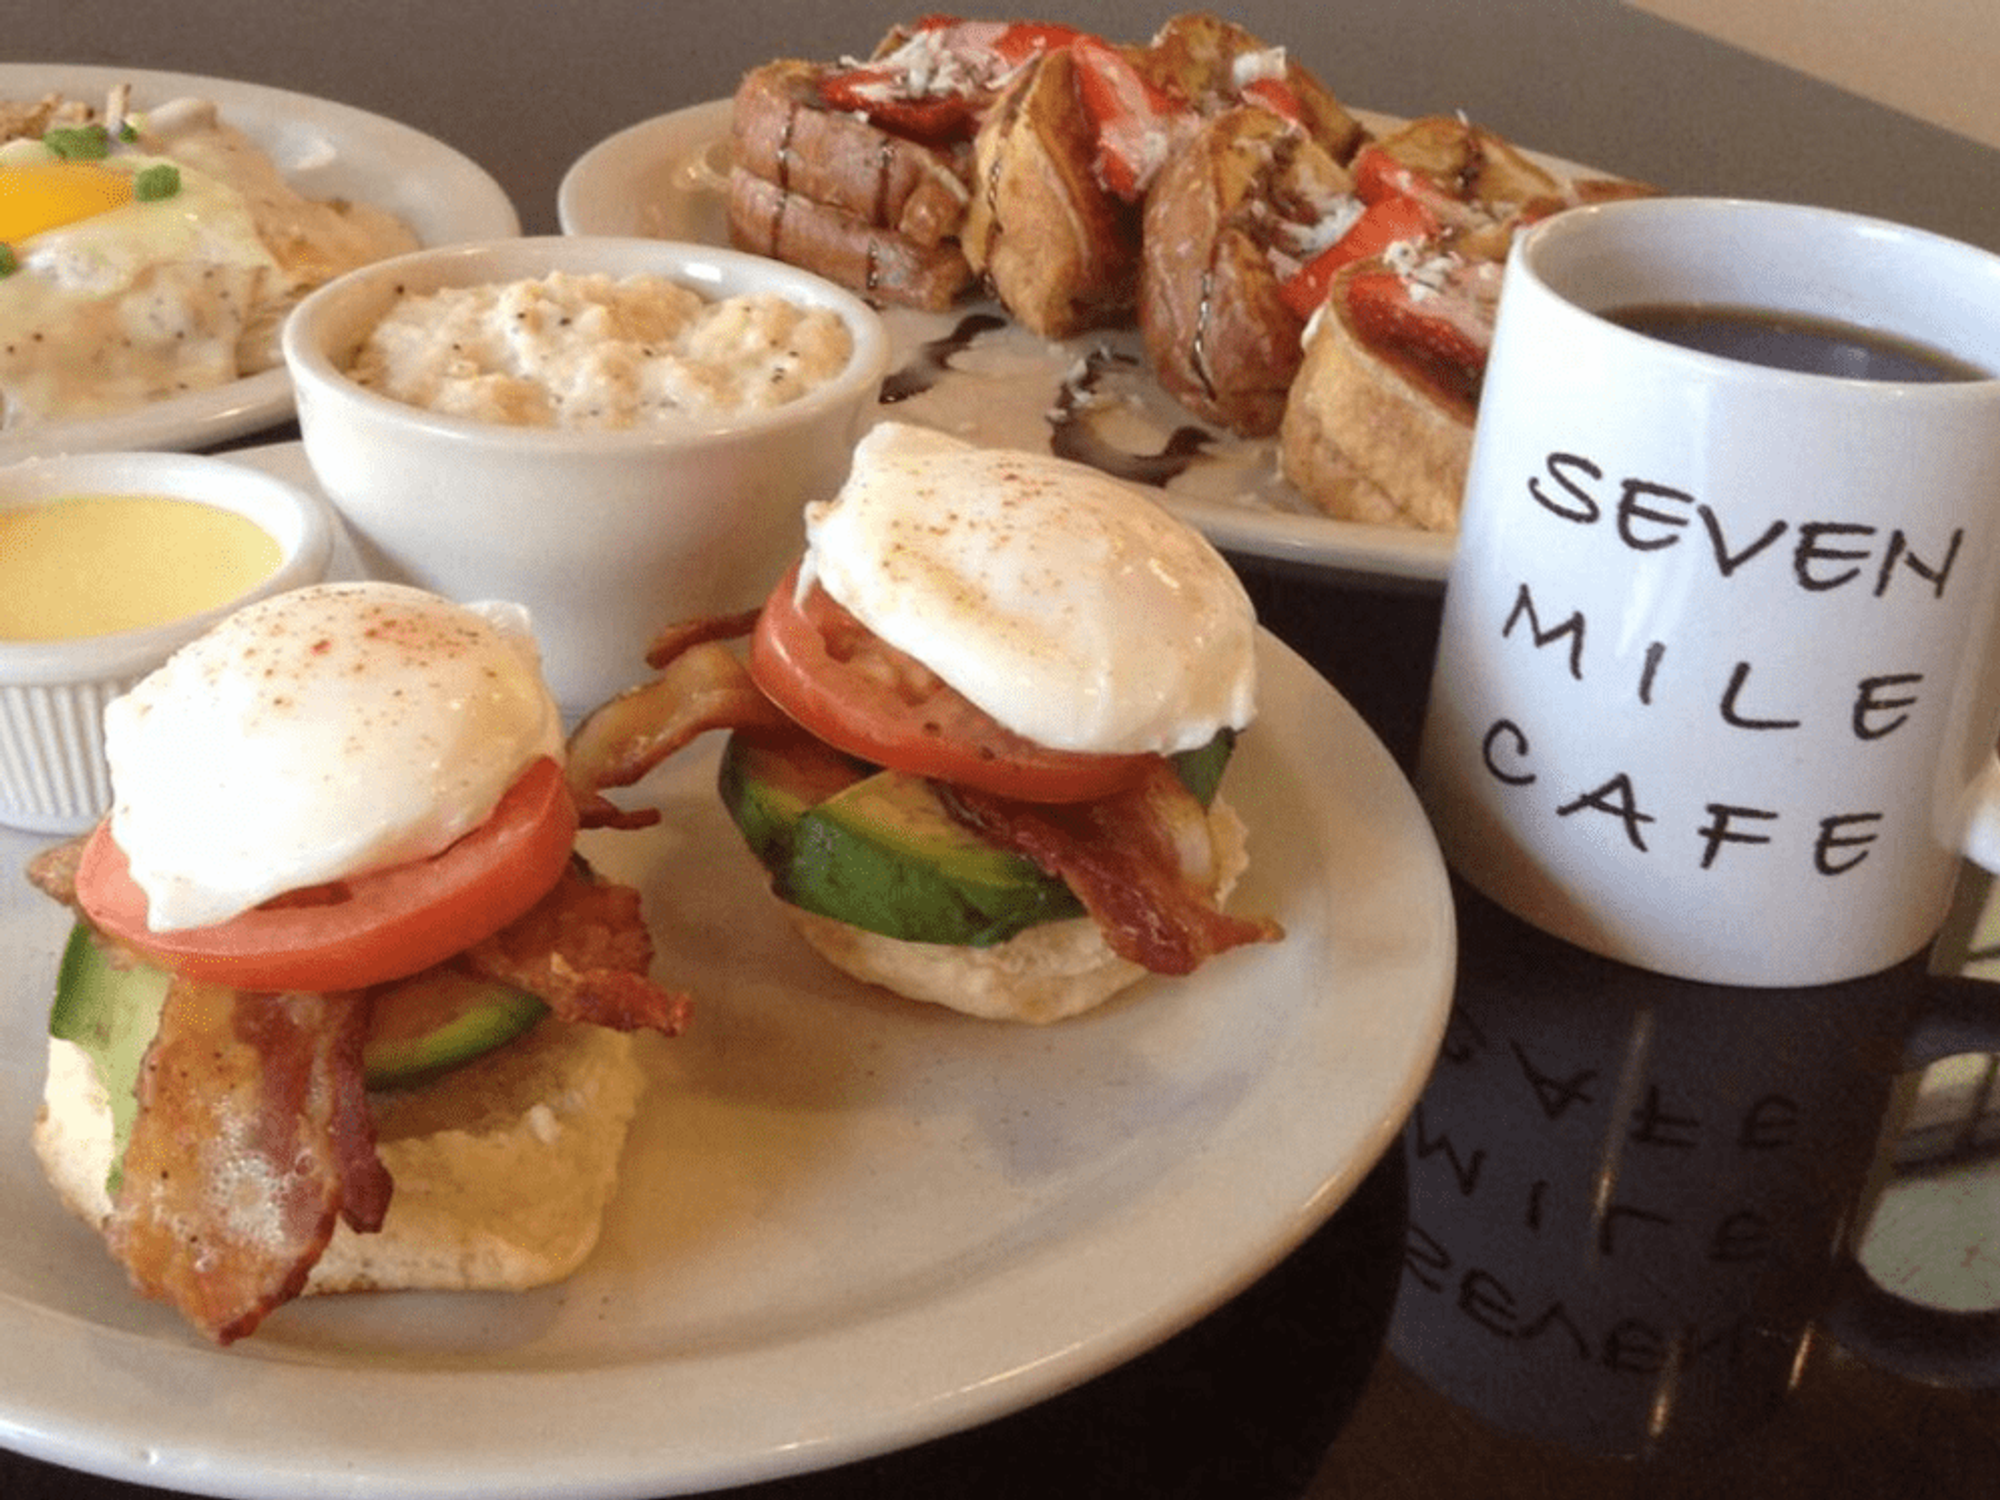 Seven Mile was doing breakfast before breakfast was a thing.